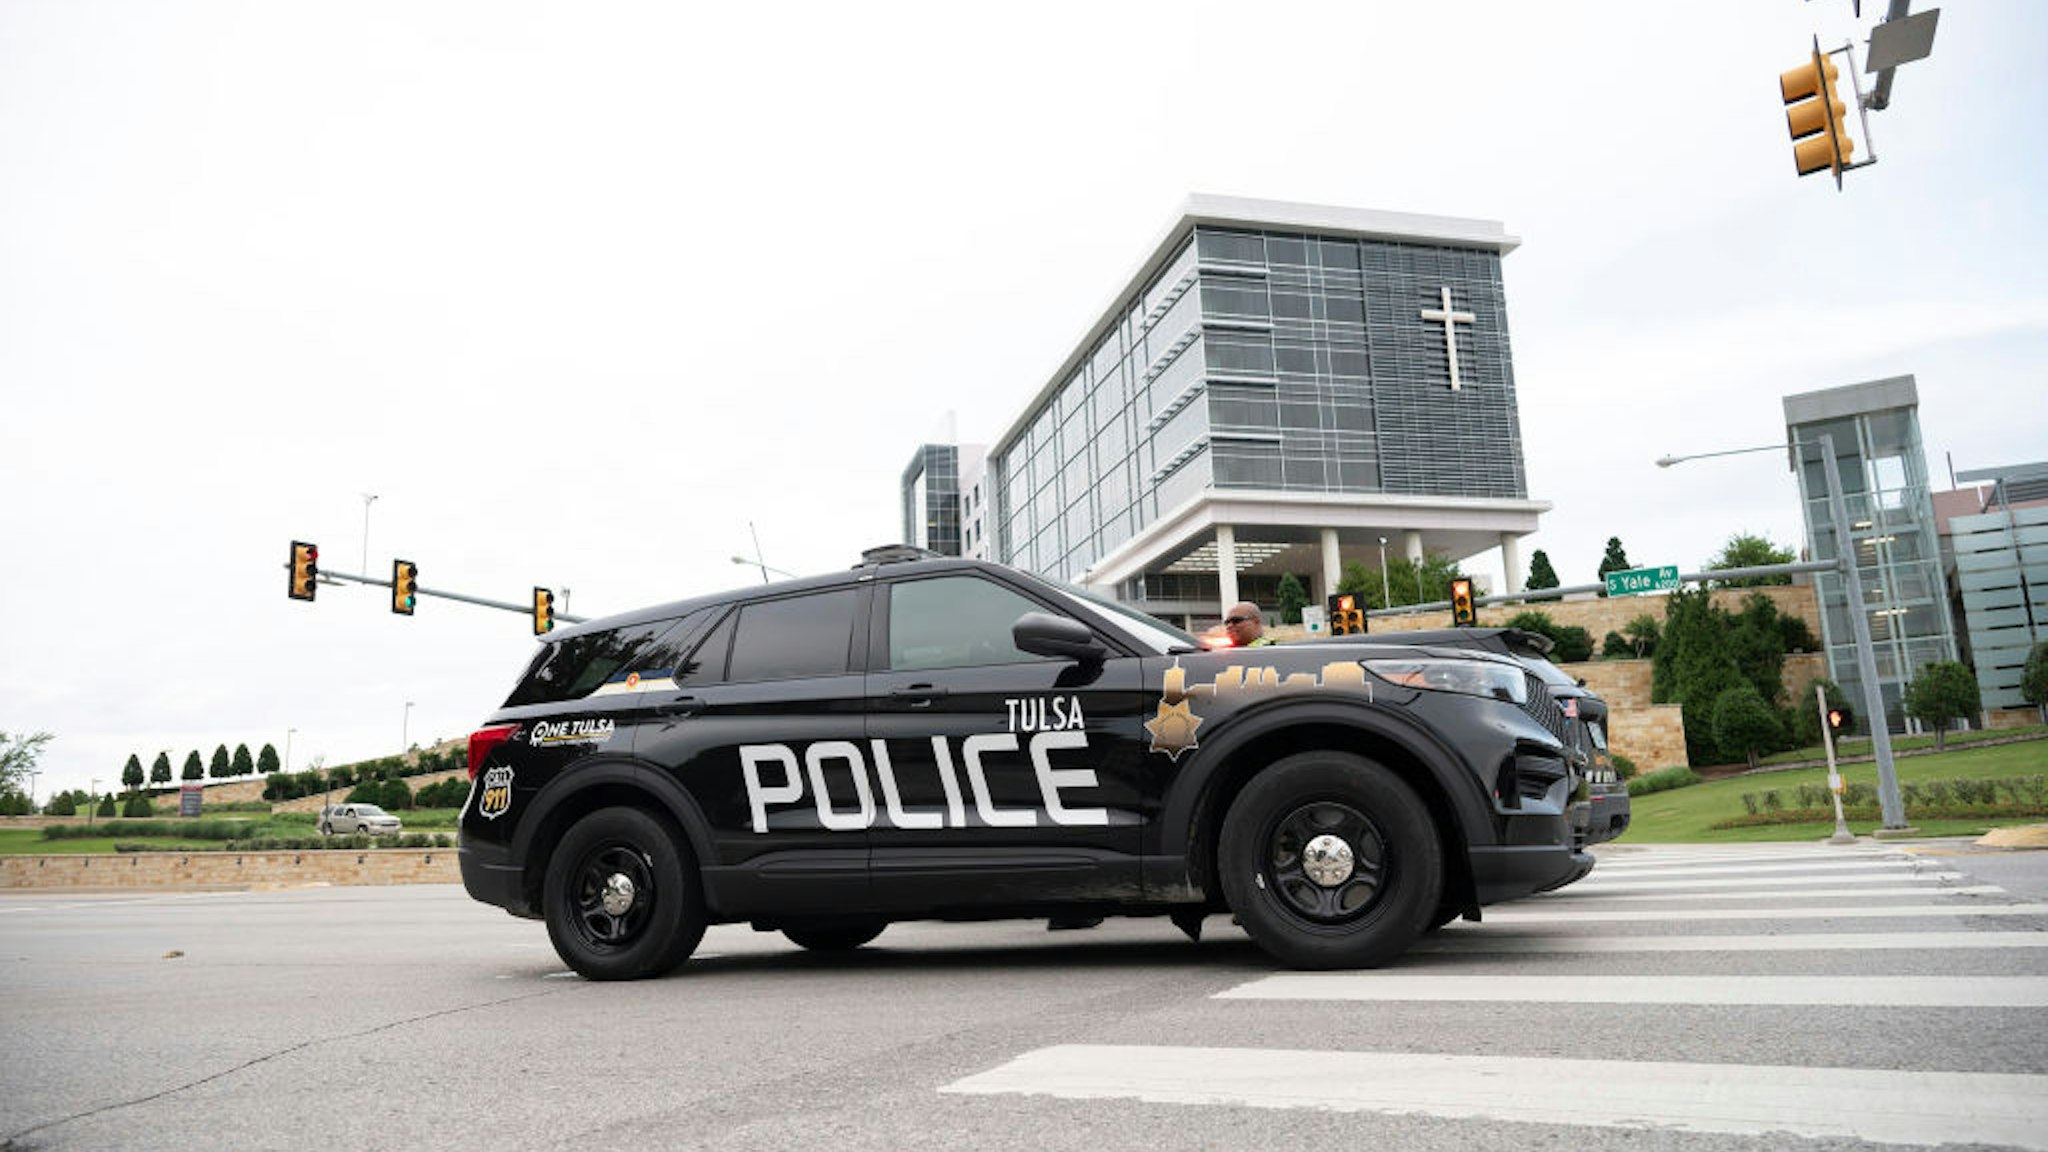 Police respond to the scene of a mass shooting at St. Francis Hospital on June 1, 2022 in Tulsa, Oklahoma.